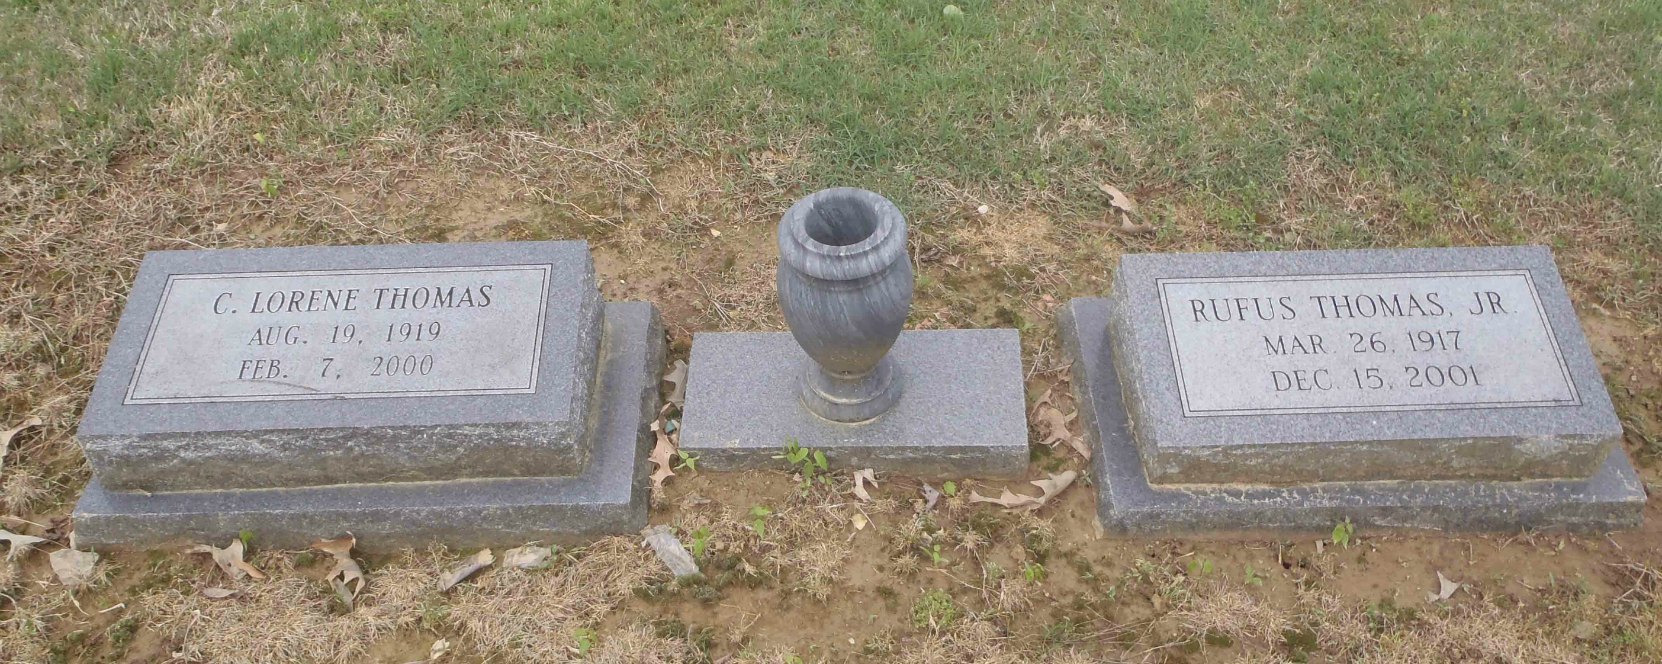 The grave of Rufus Thomas Jr. (1917-2001) and his wife C. Lorene Thomas (1919-2000), New Park Cemetery, Memphis, Tennessee